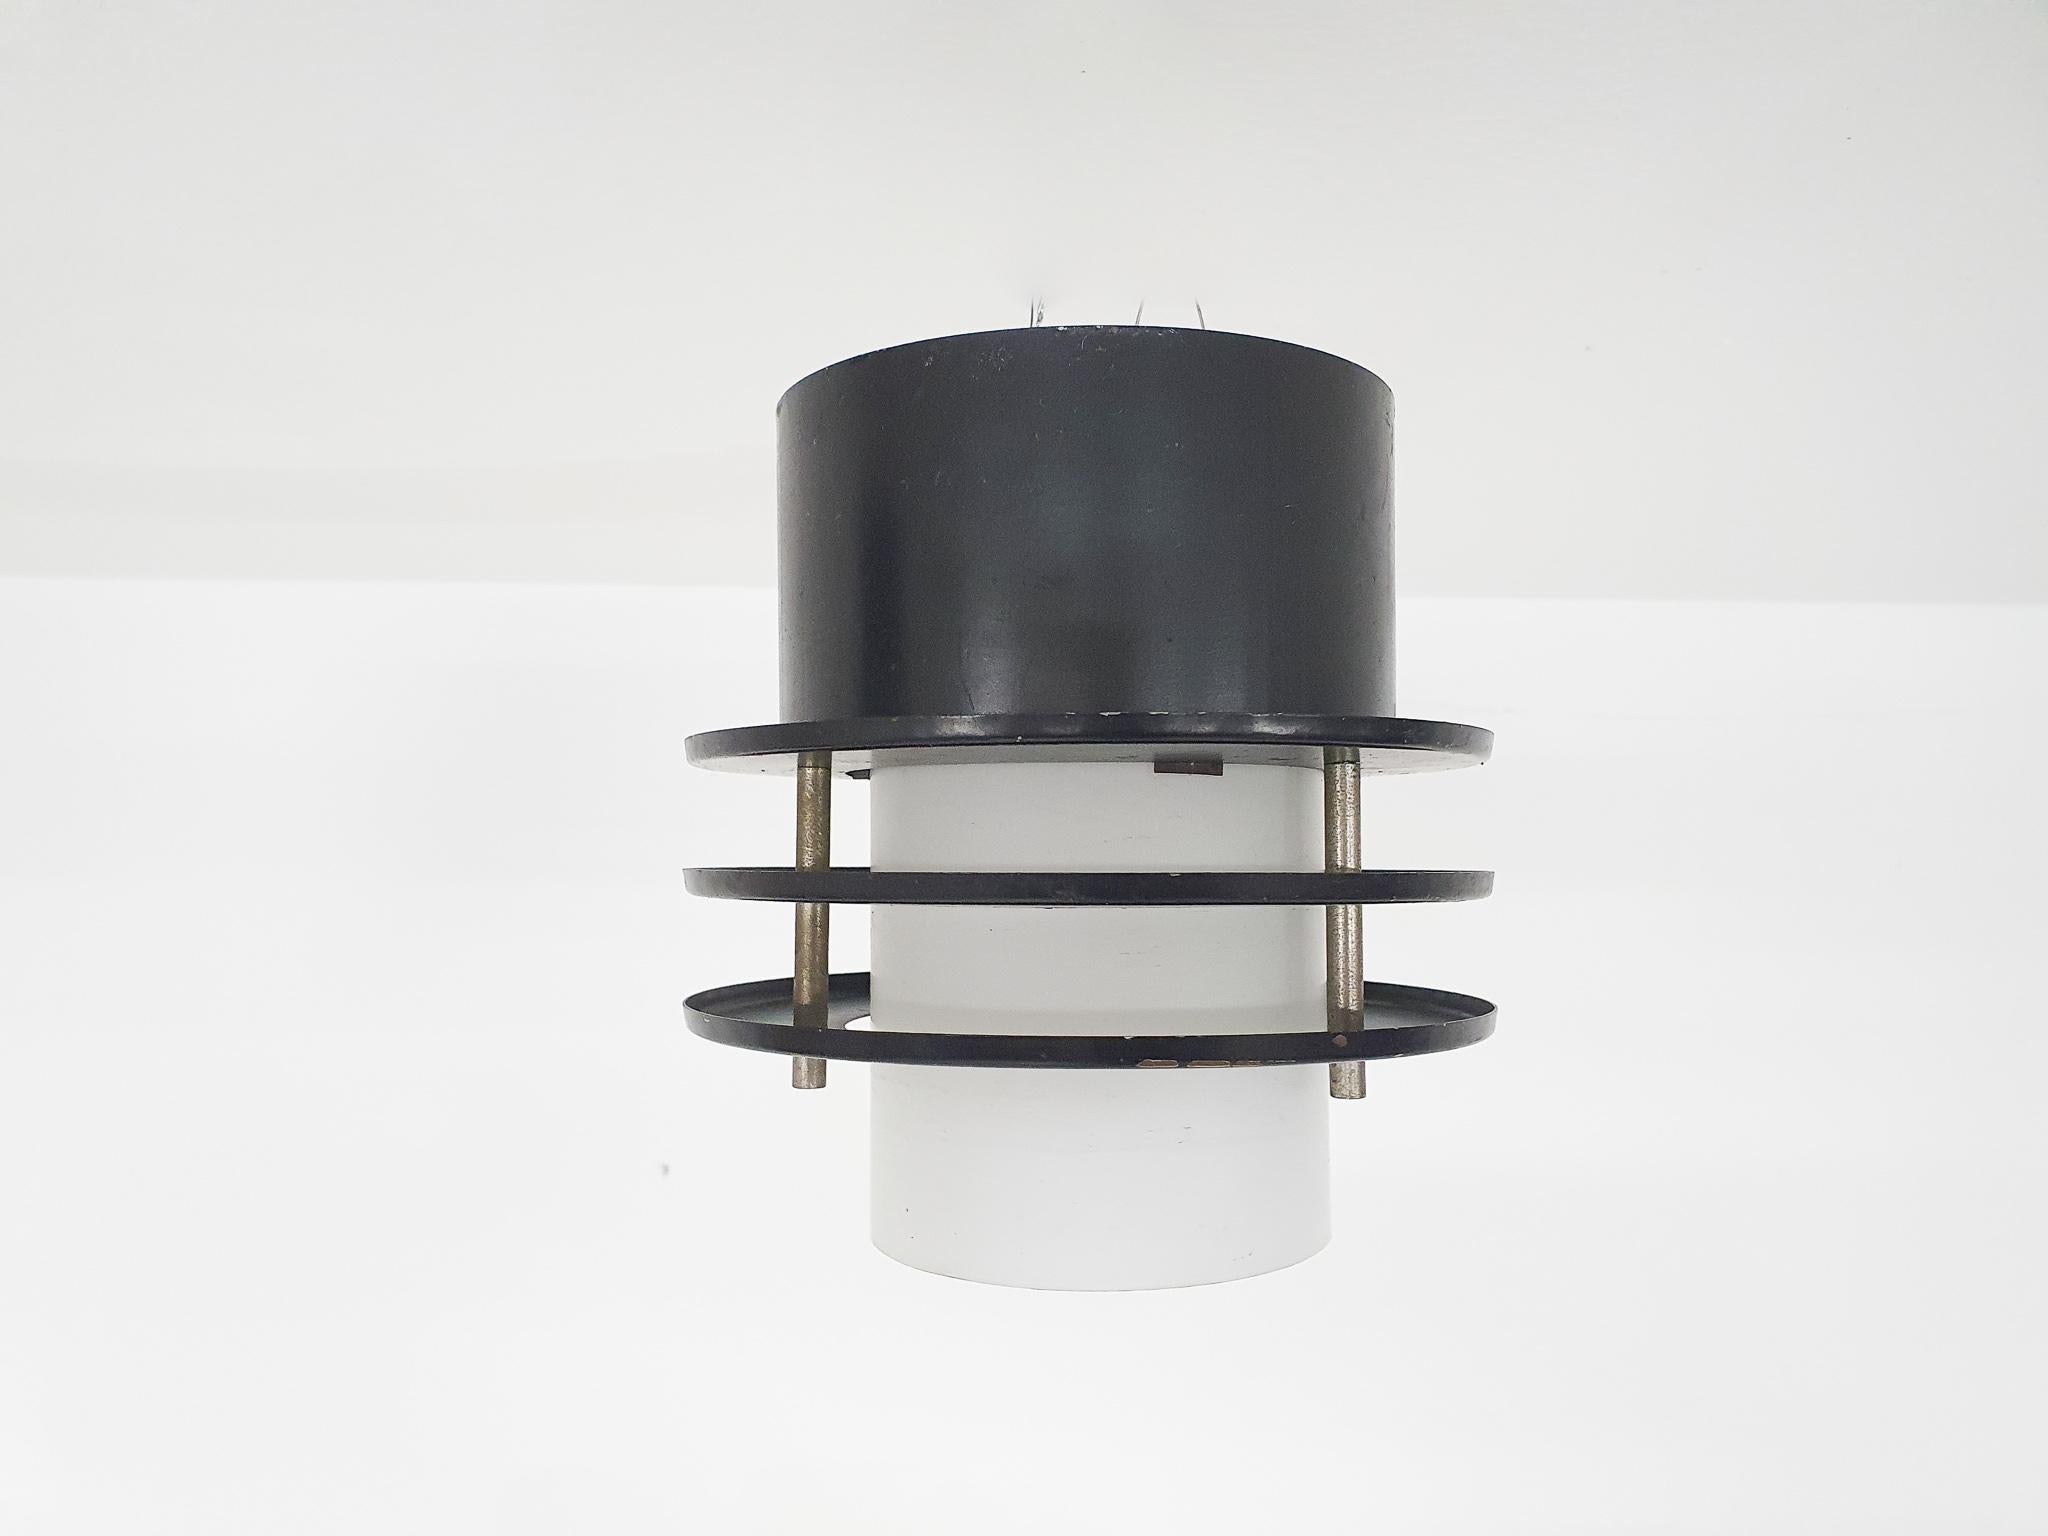 20th Century Set of Two Minimalistic Ceiling Lights in Glass and Metal, the Netherlands '60s For Sale